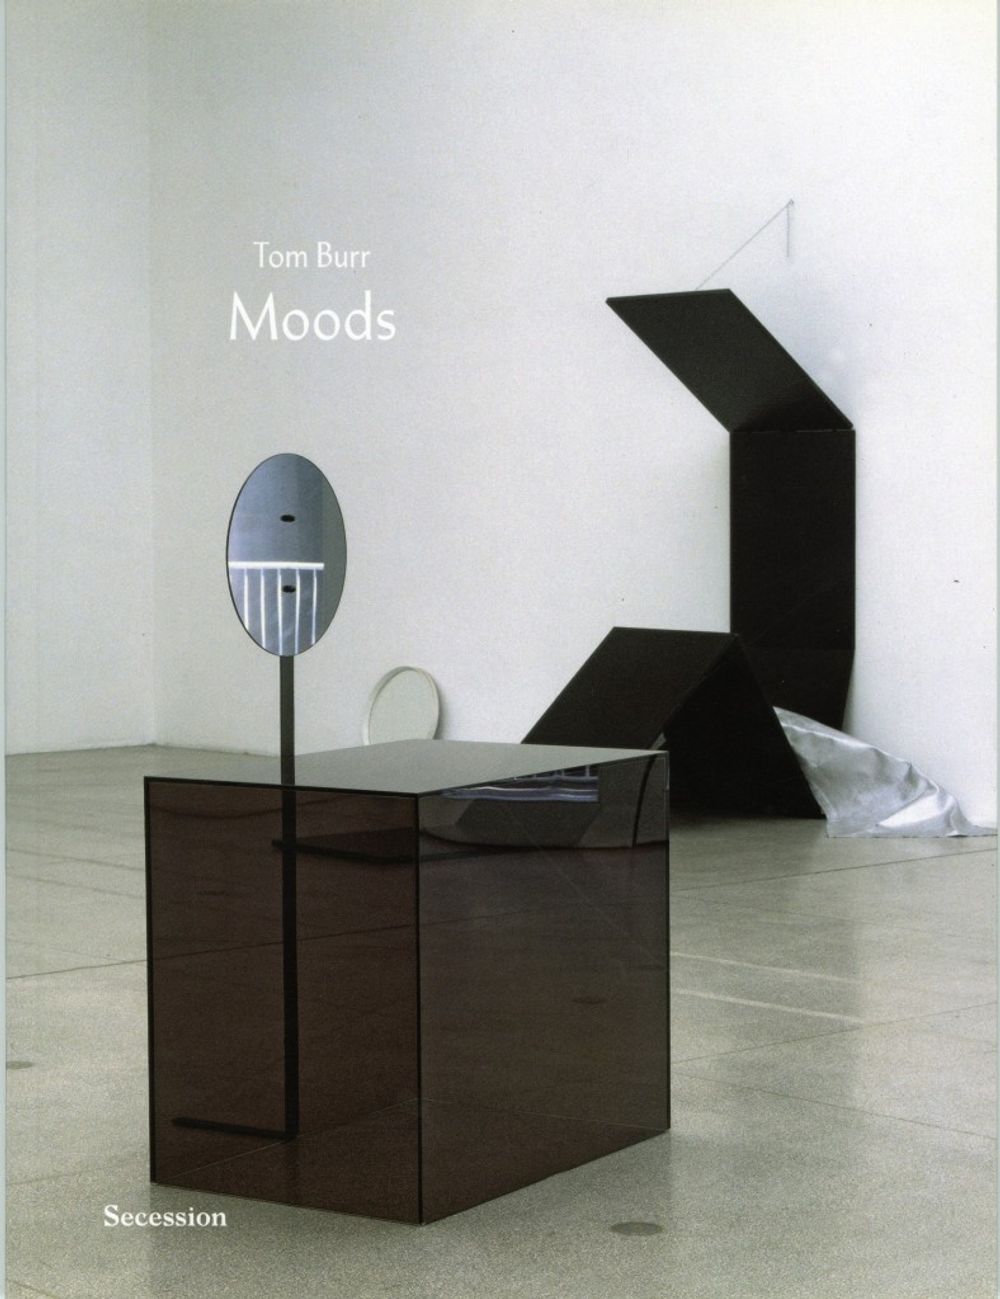 Book cover on plain gray background with title of Tom Burr: Moods